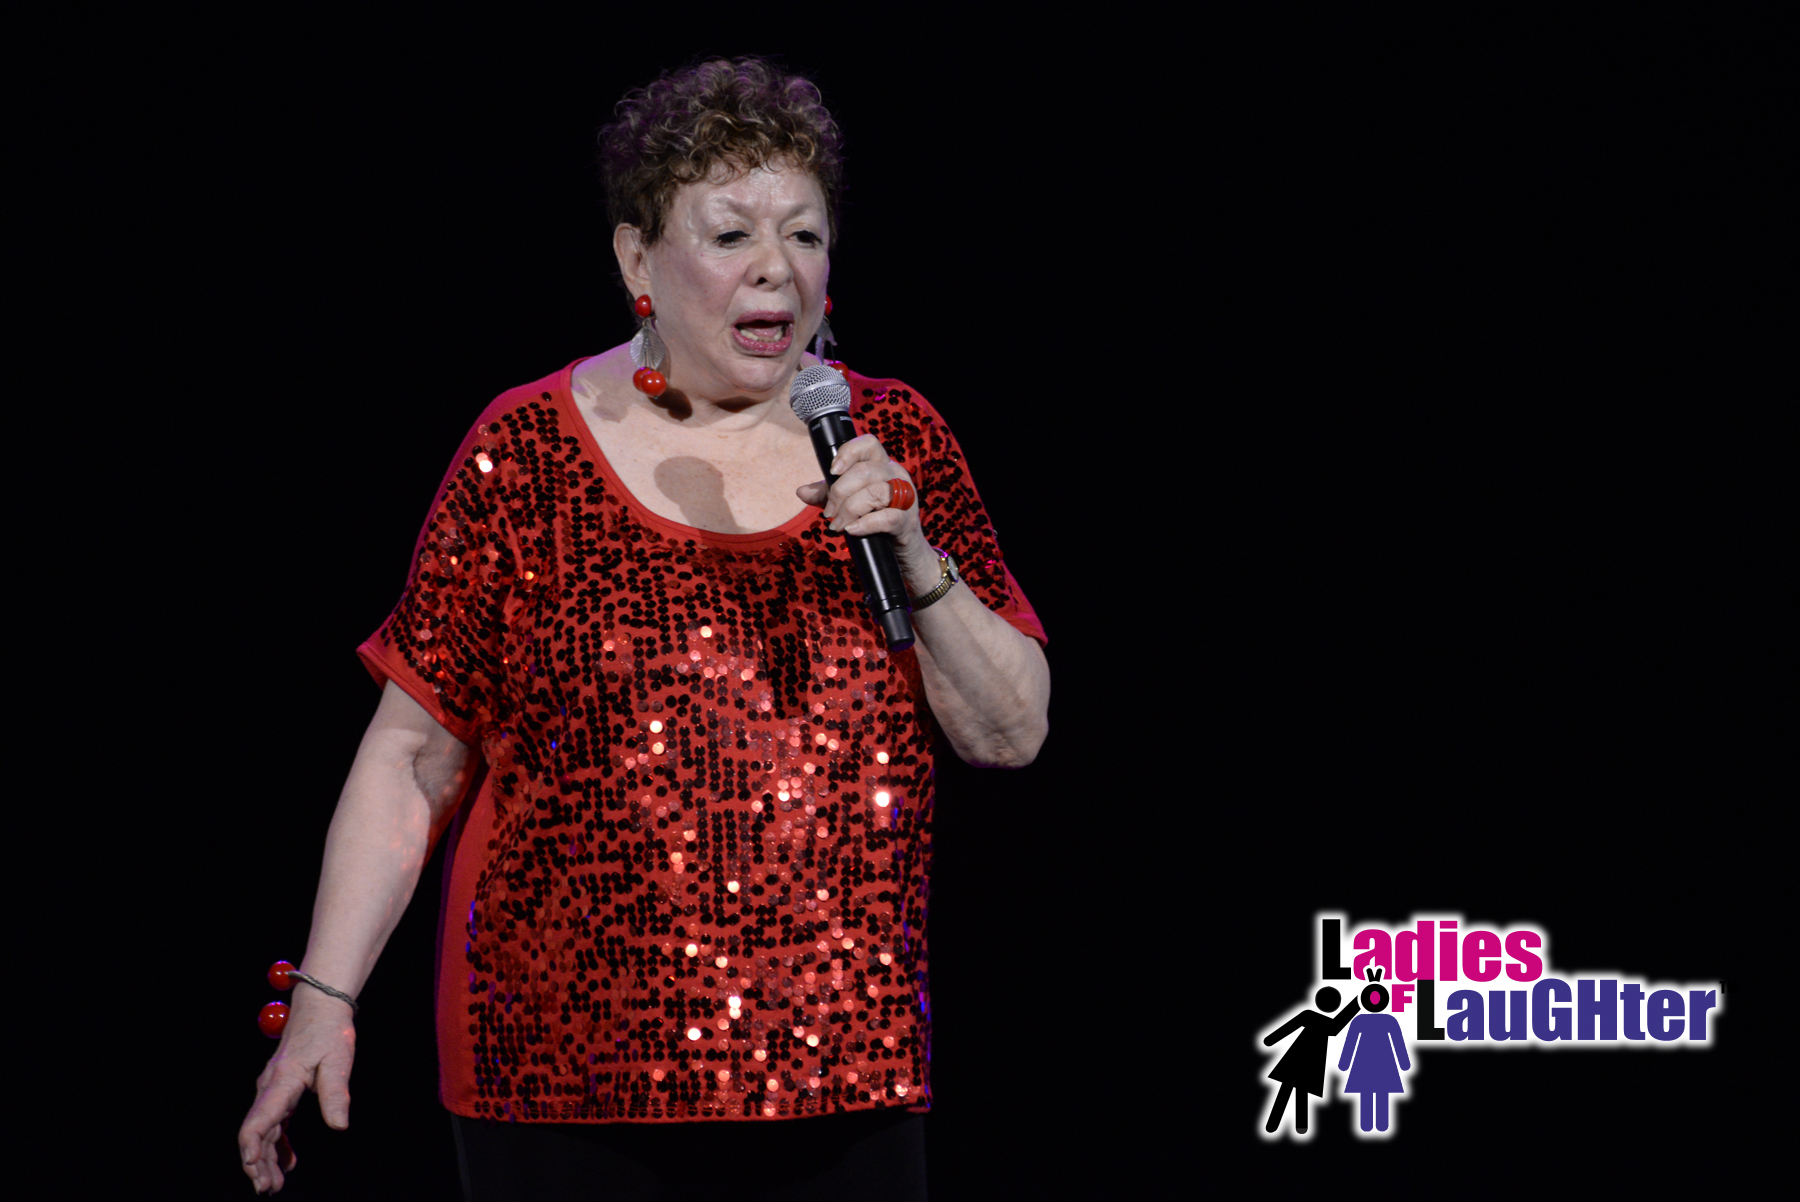 Ladies of Laughter 2016 Finals - Taffy Jaffe